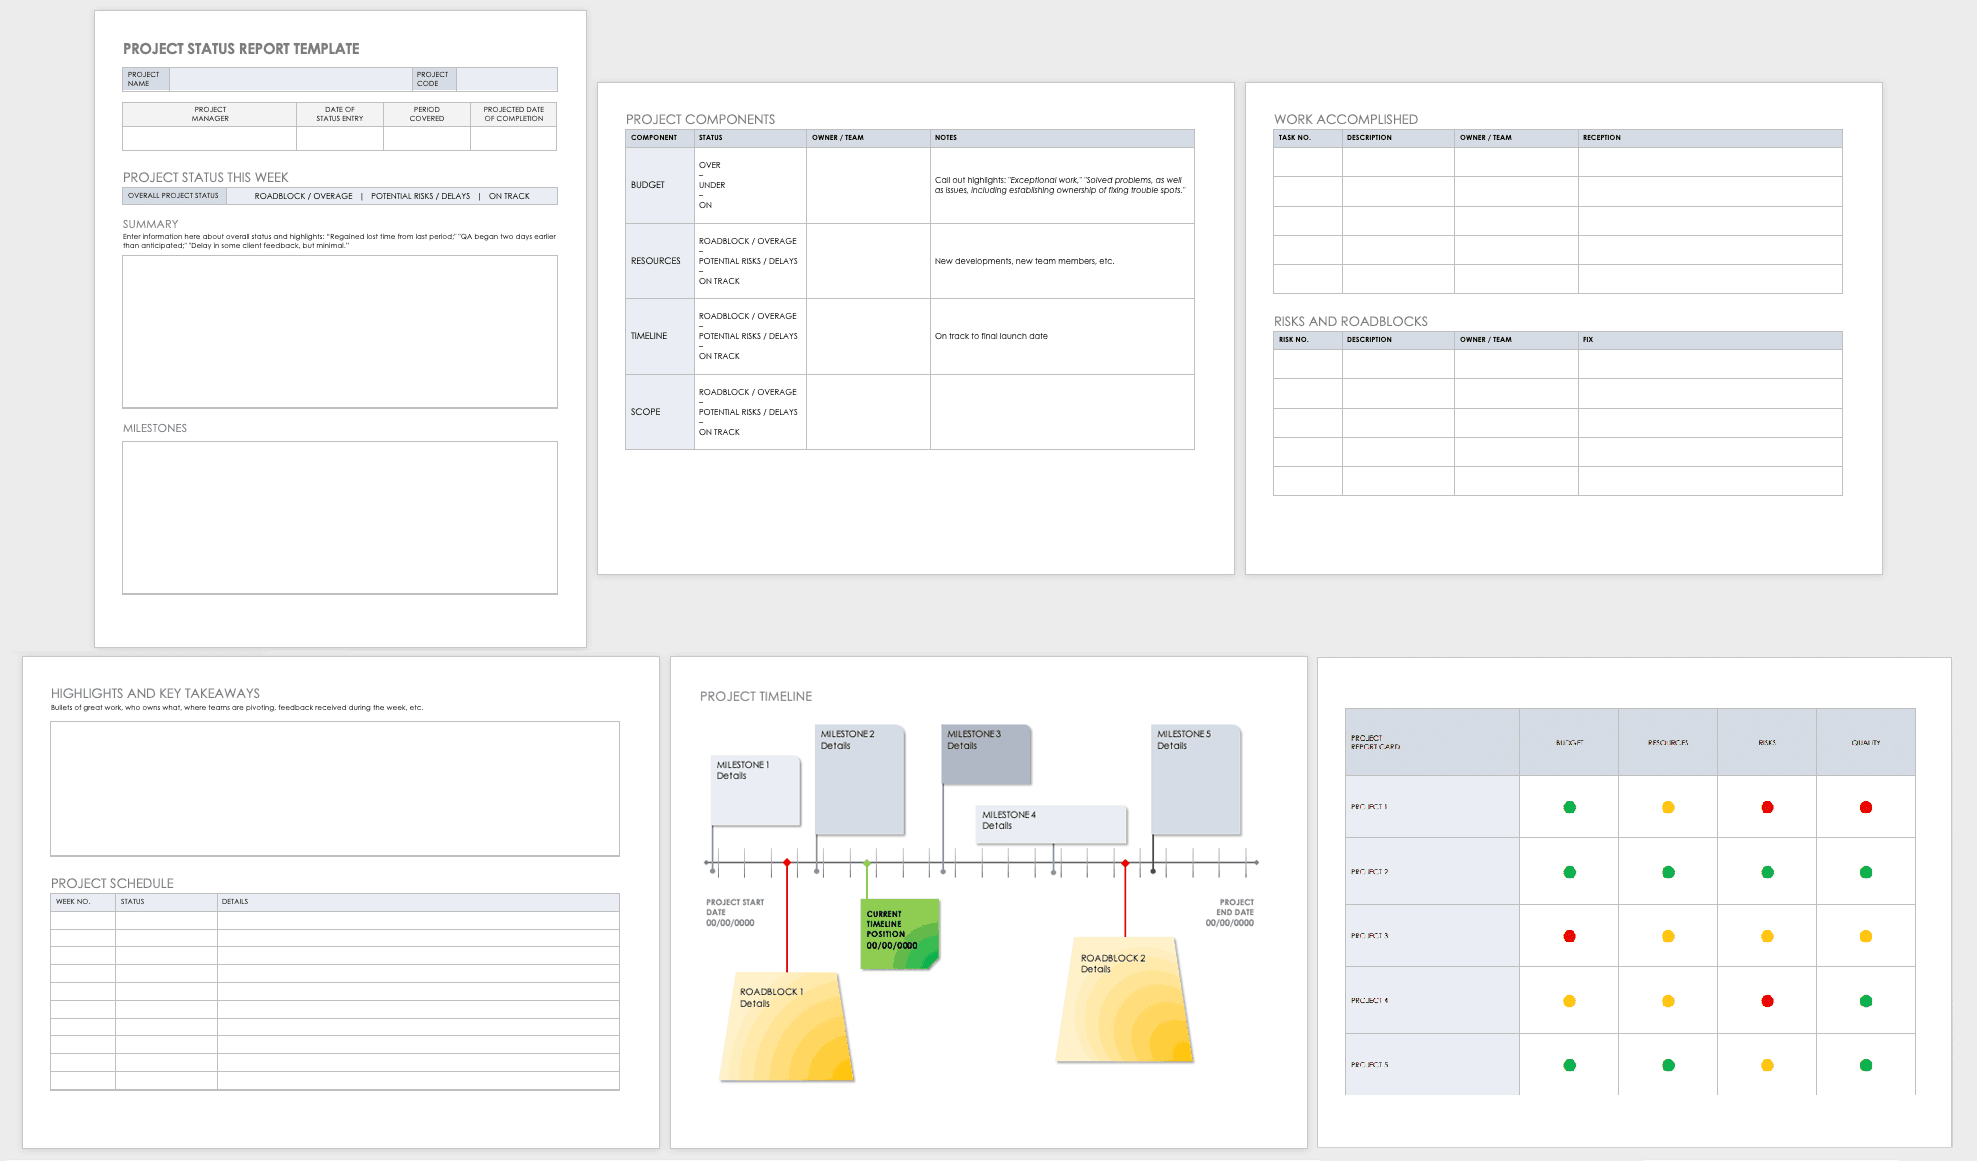 Free Project Report Templates | Smartsheet With Regard To Post Project Report Template